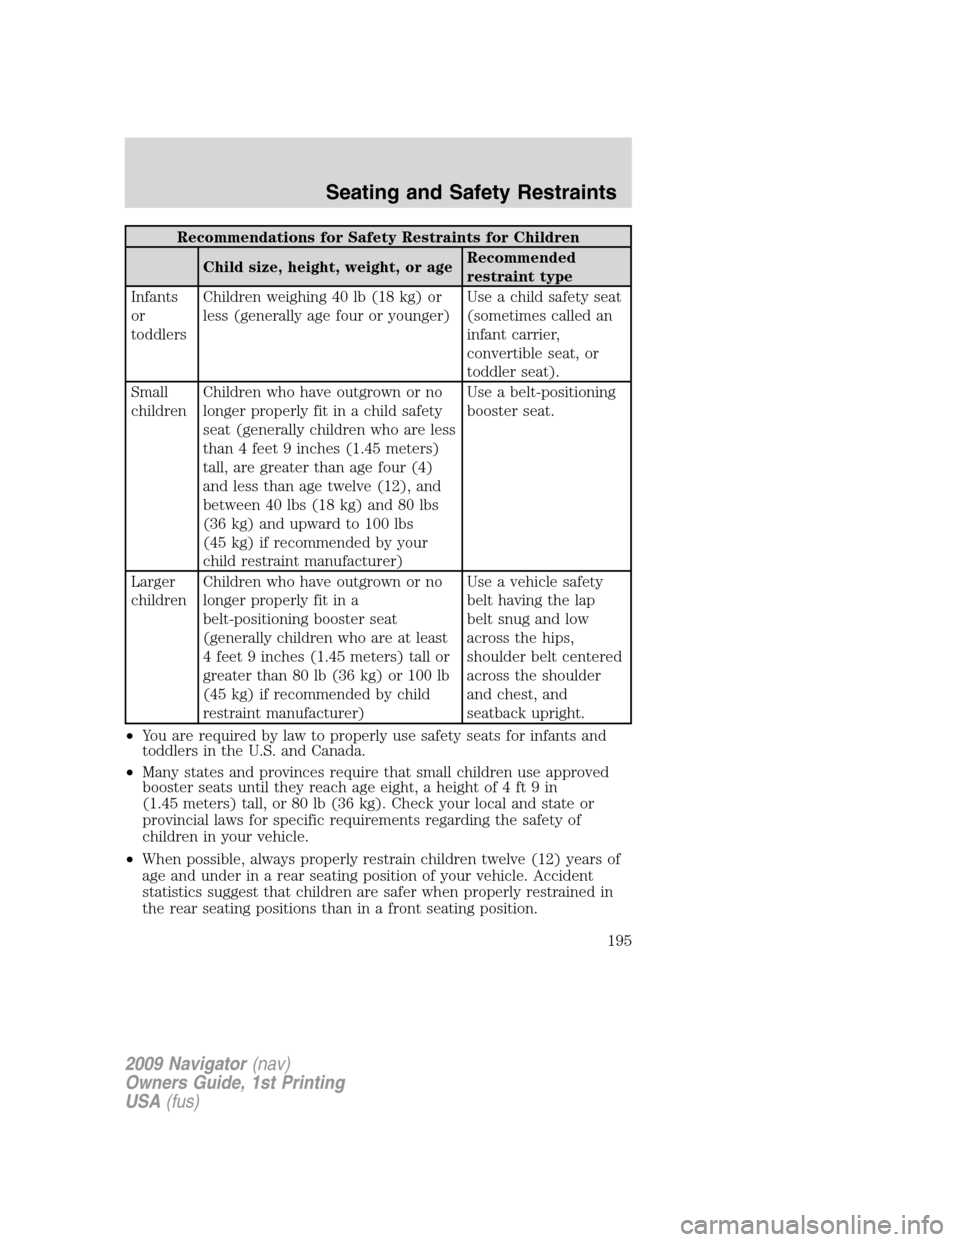 LINCOLN NAVIGATOR 2009 Owners Manual Recommendations for Safety Restraints for Children
Child size, height, weight, or ageRecommended
restraint type
Infants
or
toddlersChildren weighing 40 lb (18 kg) or
less (generally age four or younge